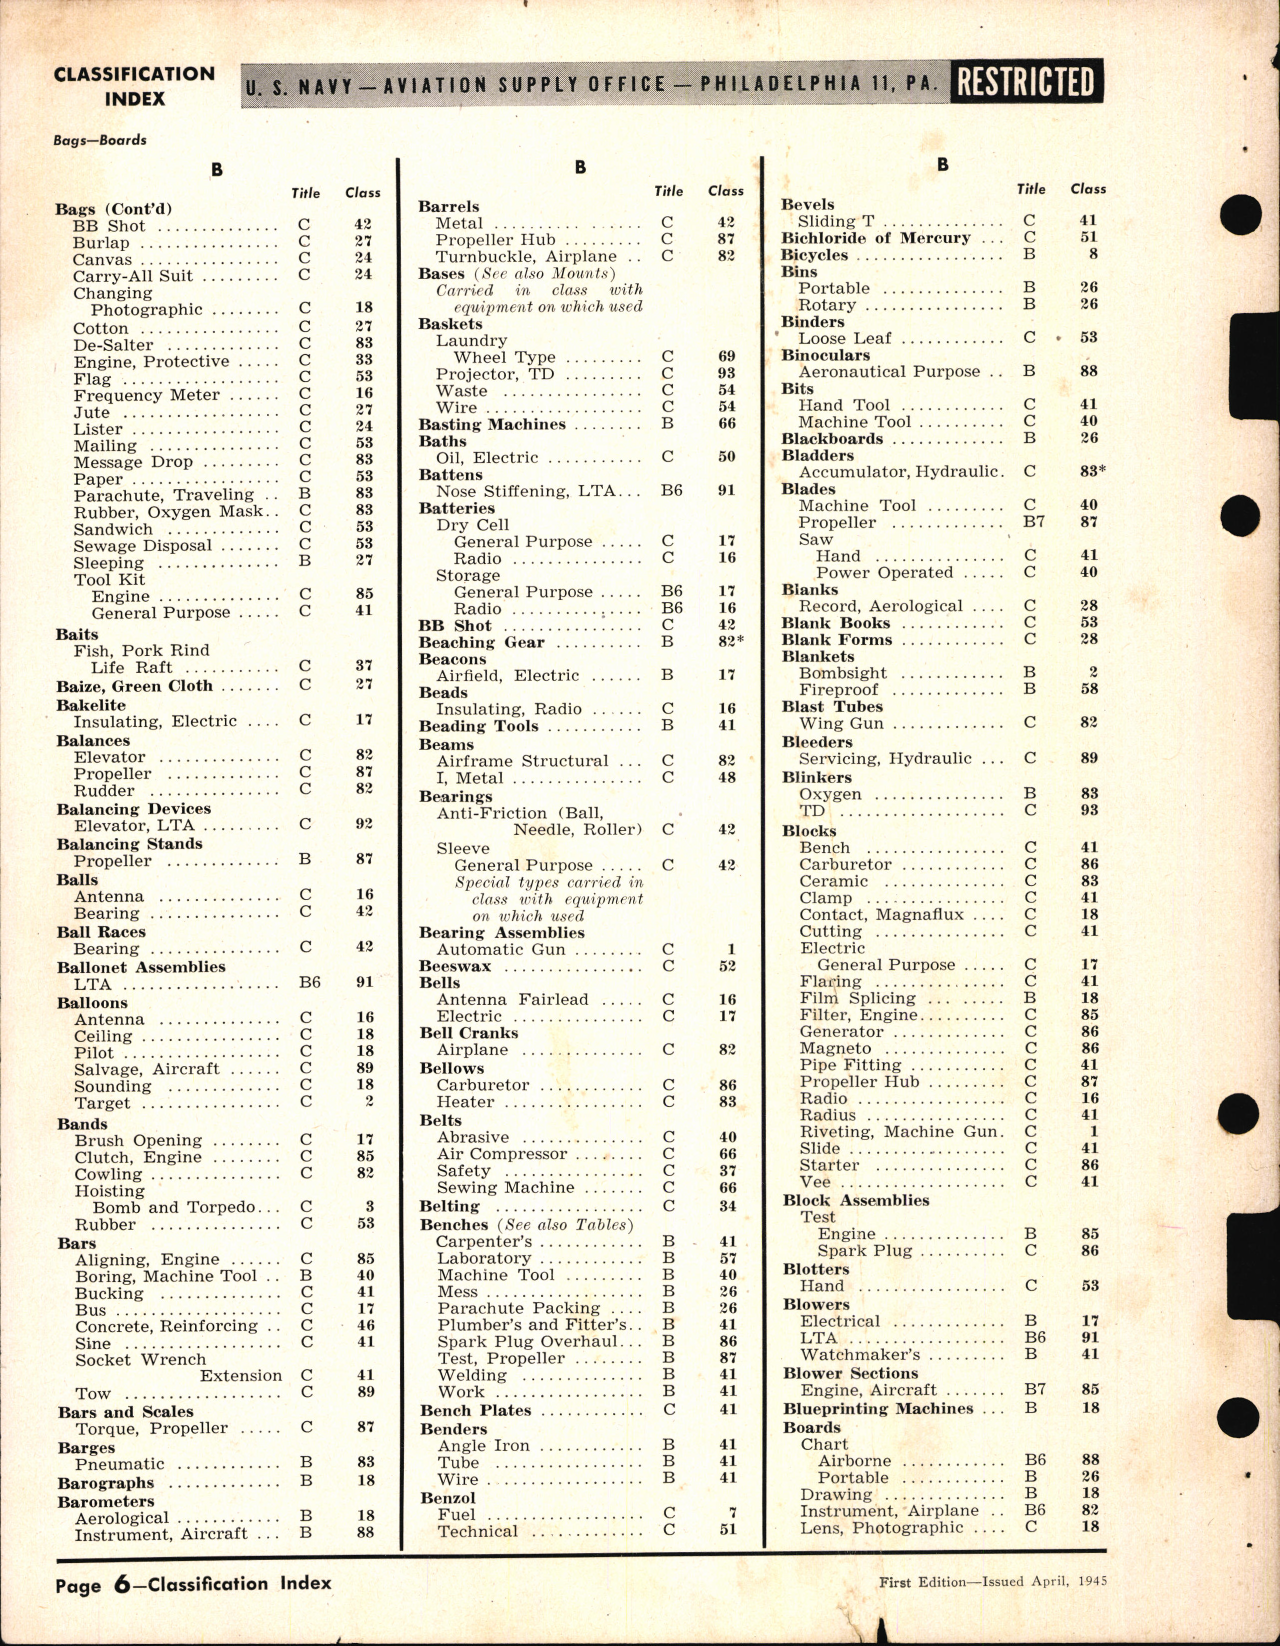 Sample page 6 from AirCorps Library document: Classification Index of Naval Aeronautical Materials 